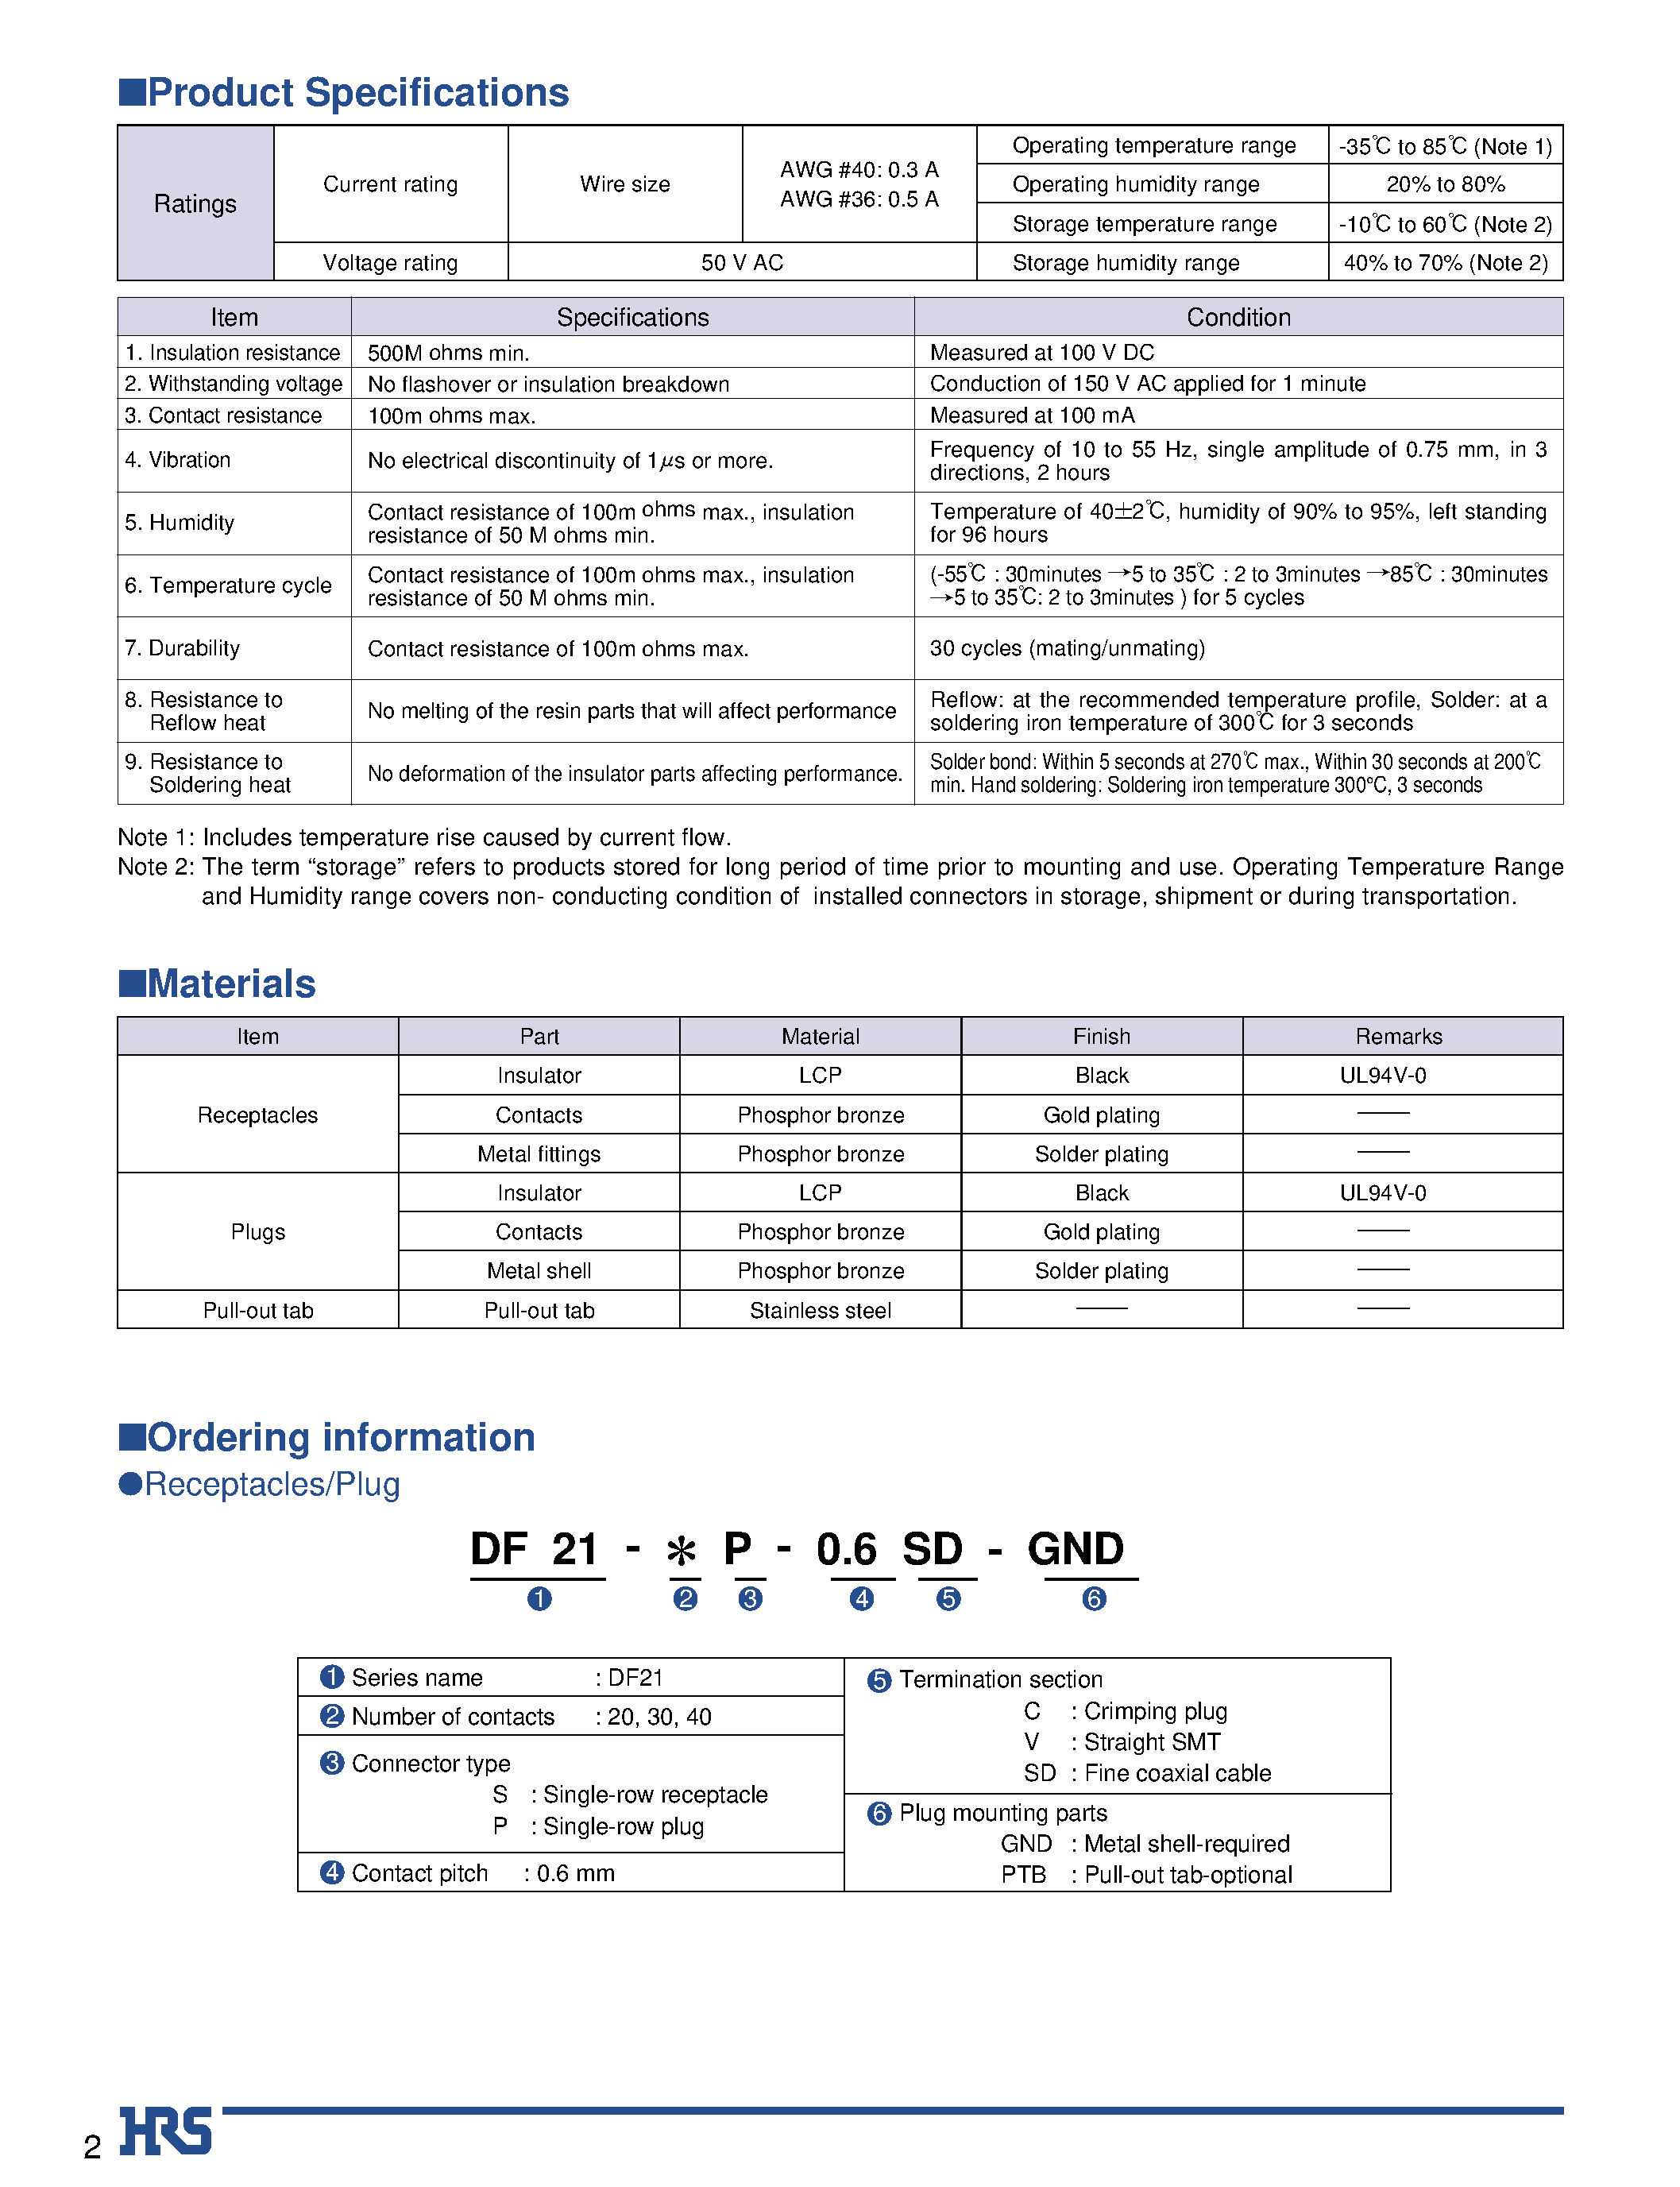 Datasheet DF21-40S-0.6V - 0.6mm Pitch Board-to-Fine-Coaxial Cable Connectors page 2